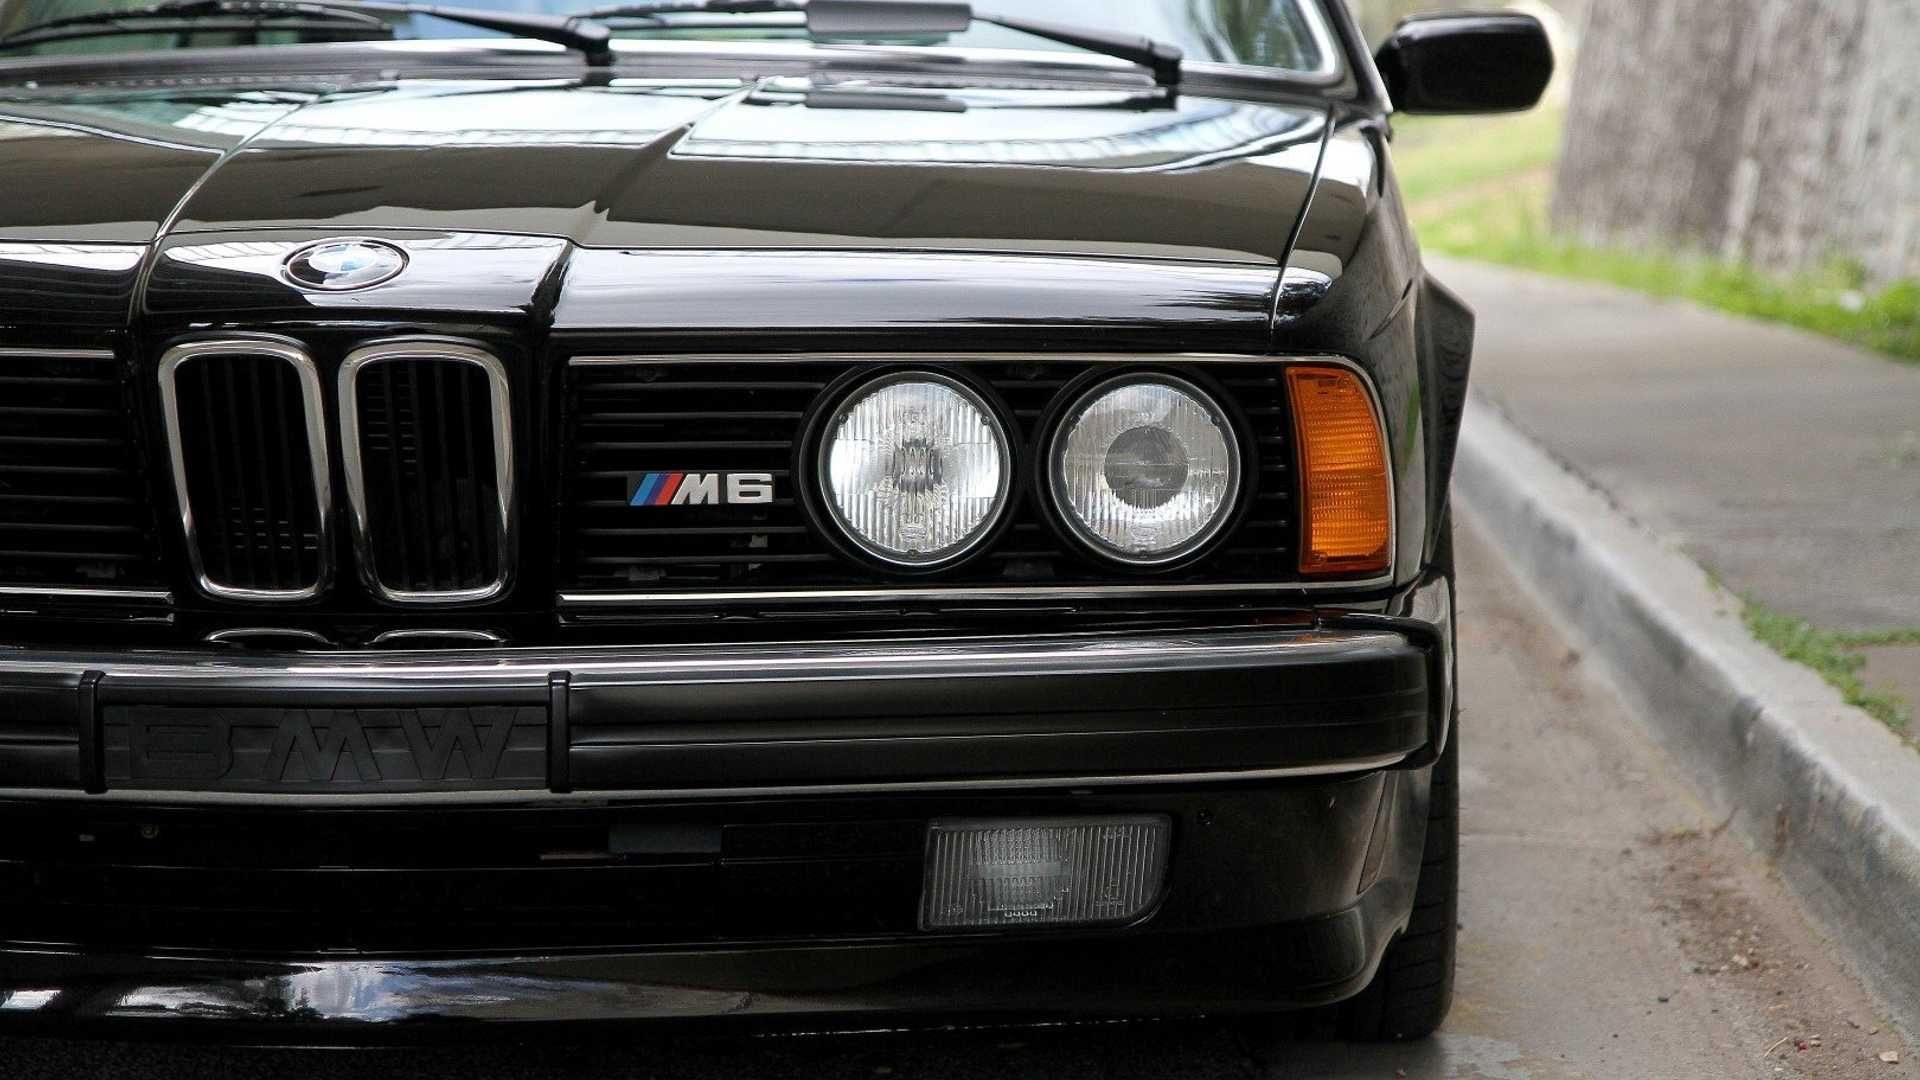 The Greatest Looking Coupe From The Eighties: BMW M6